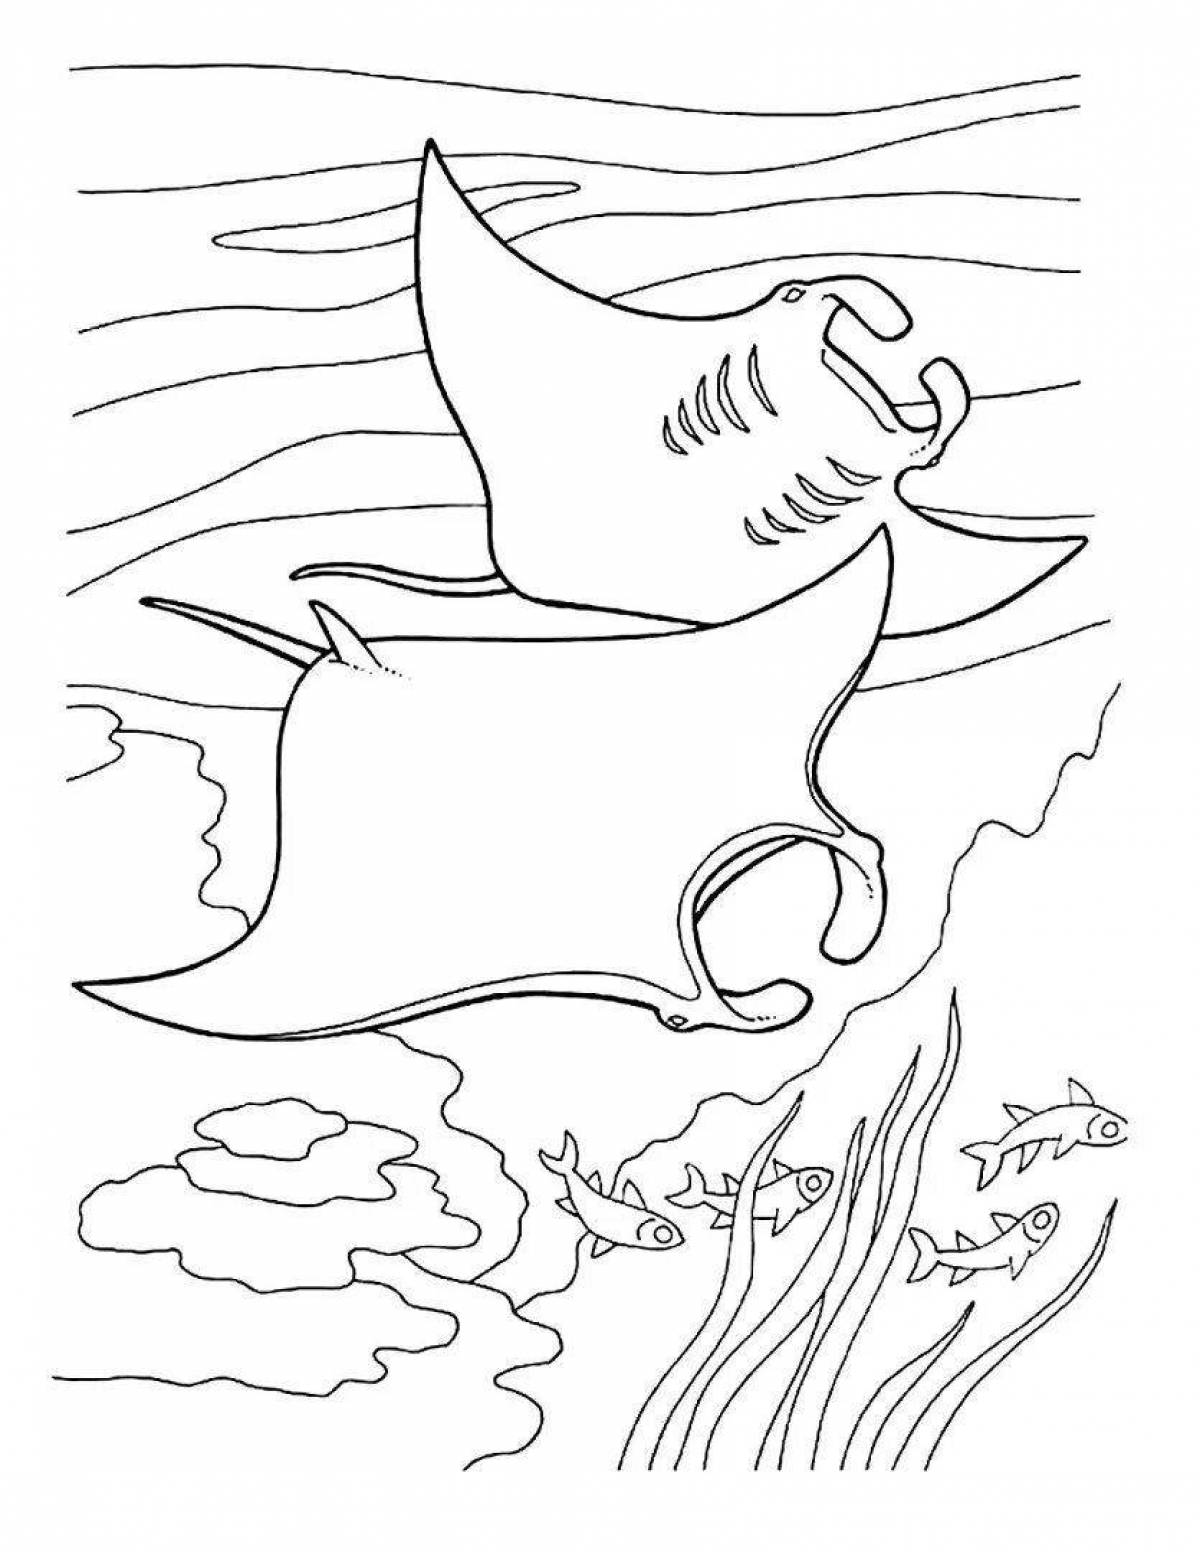 Colorful ramp coloring page for kids